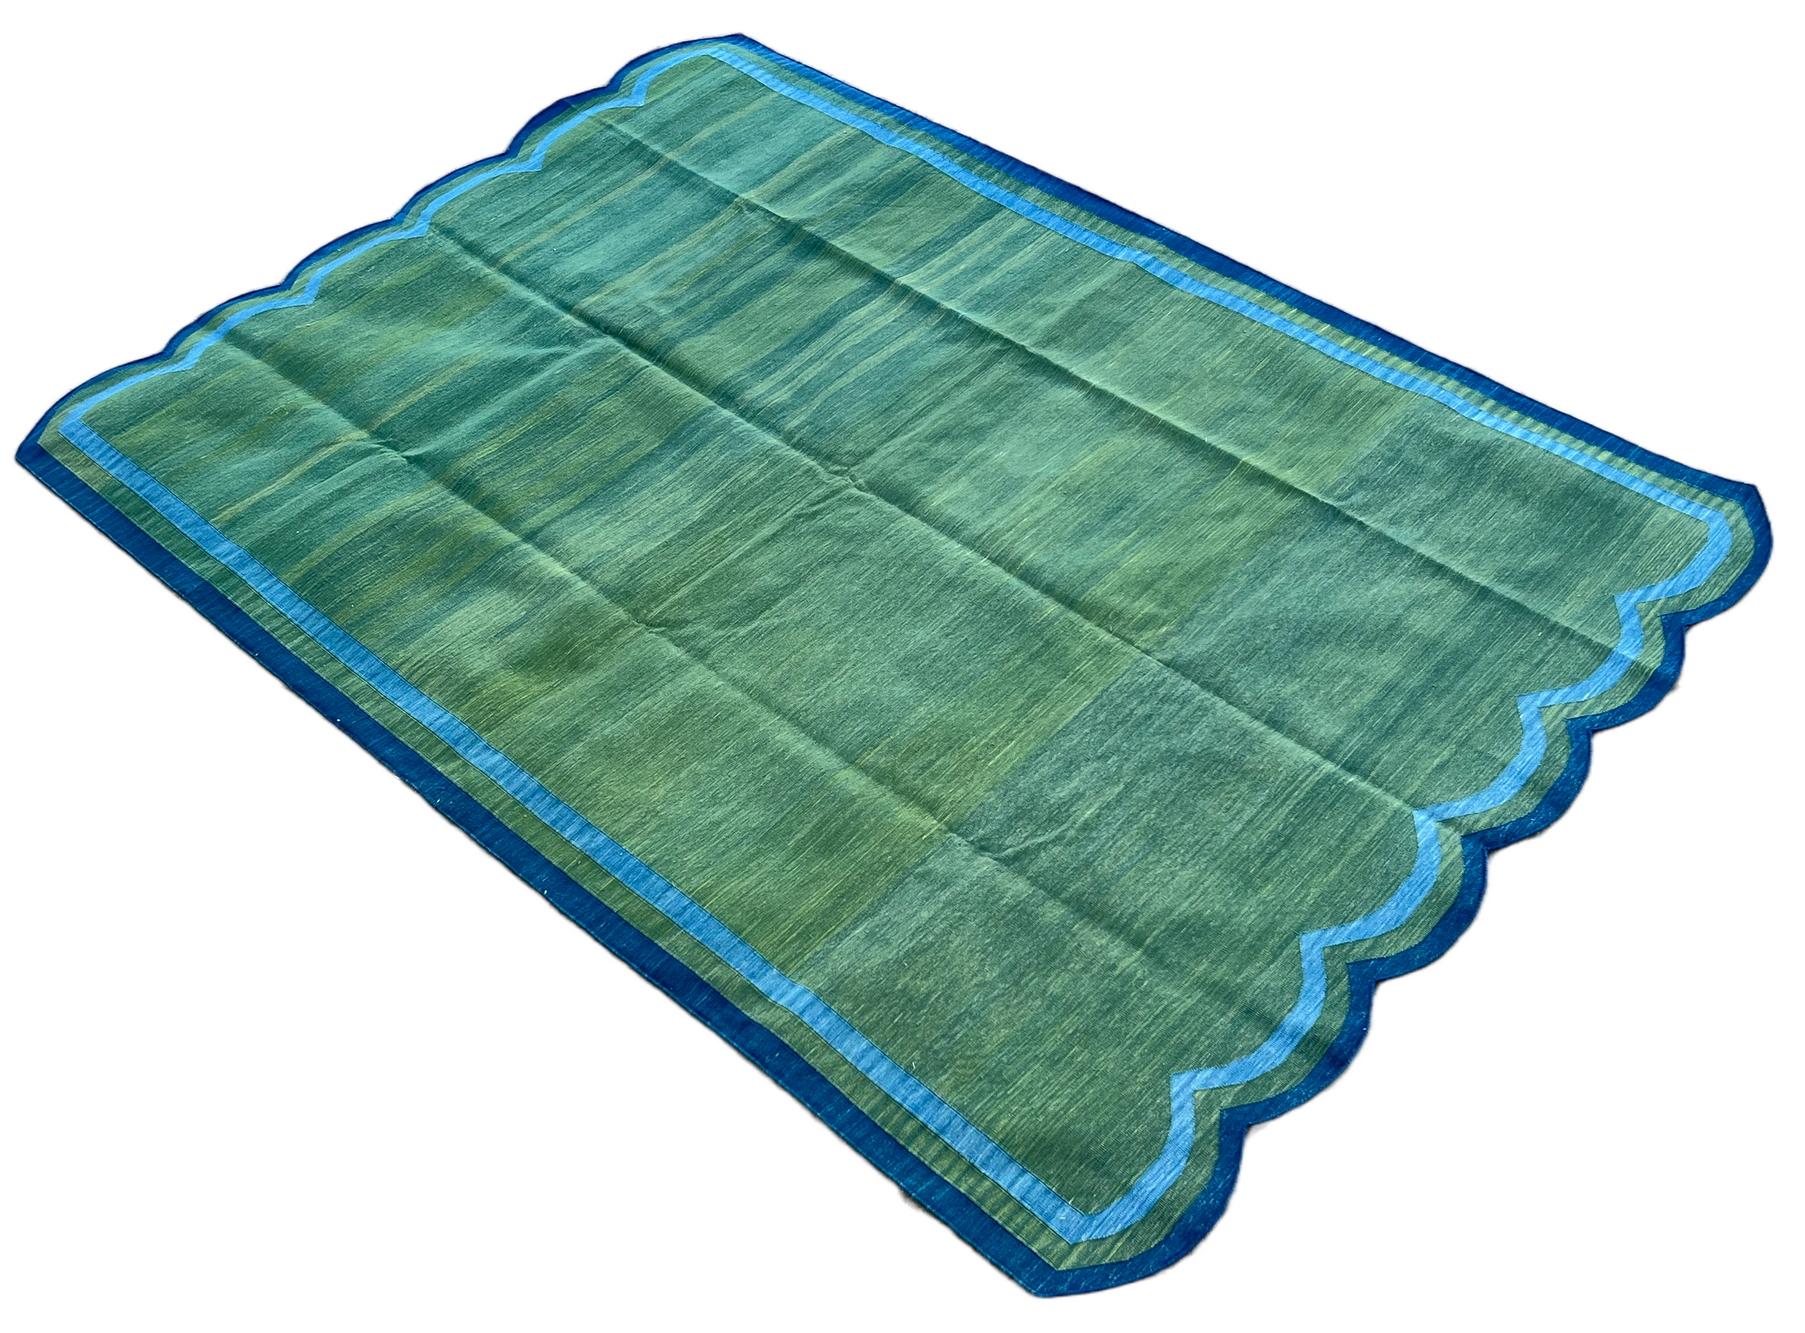 Cotton Vegetable Dyed Reversible Forest Green And Blue Indian Scalloped Rug - 6'x9'
These special flat-weave dhurries are hand-woven with 15 ply 100% cotton yarn. Due to the special manufacturing techniques used to create our rugs, the size and